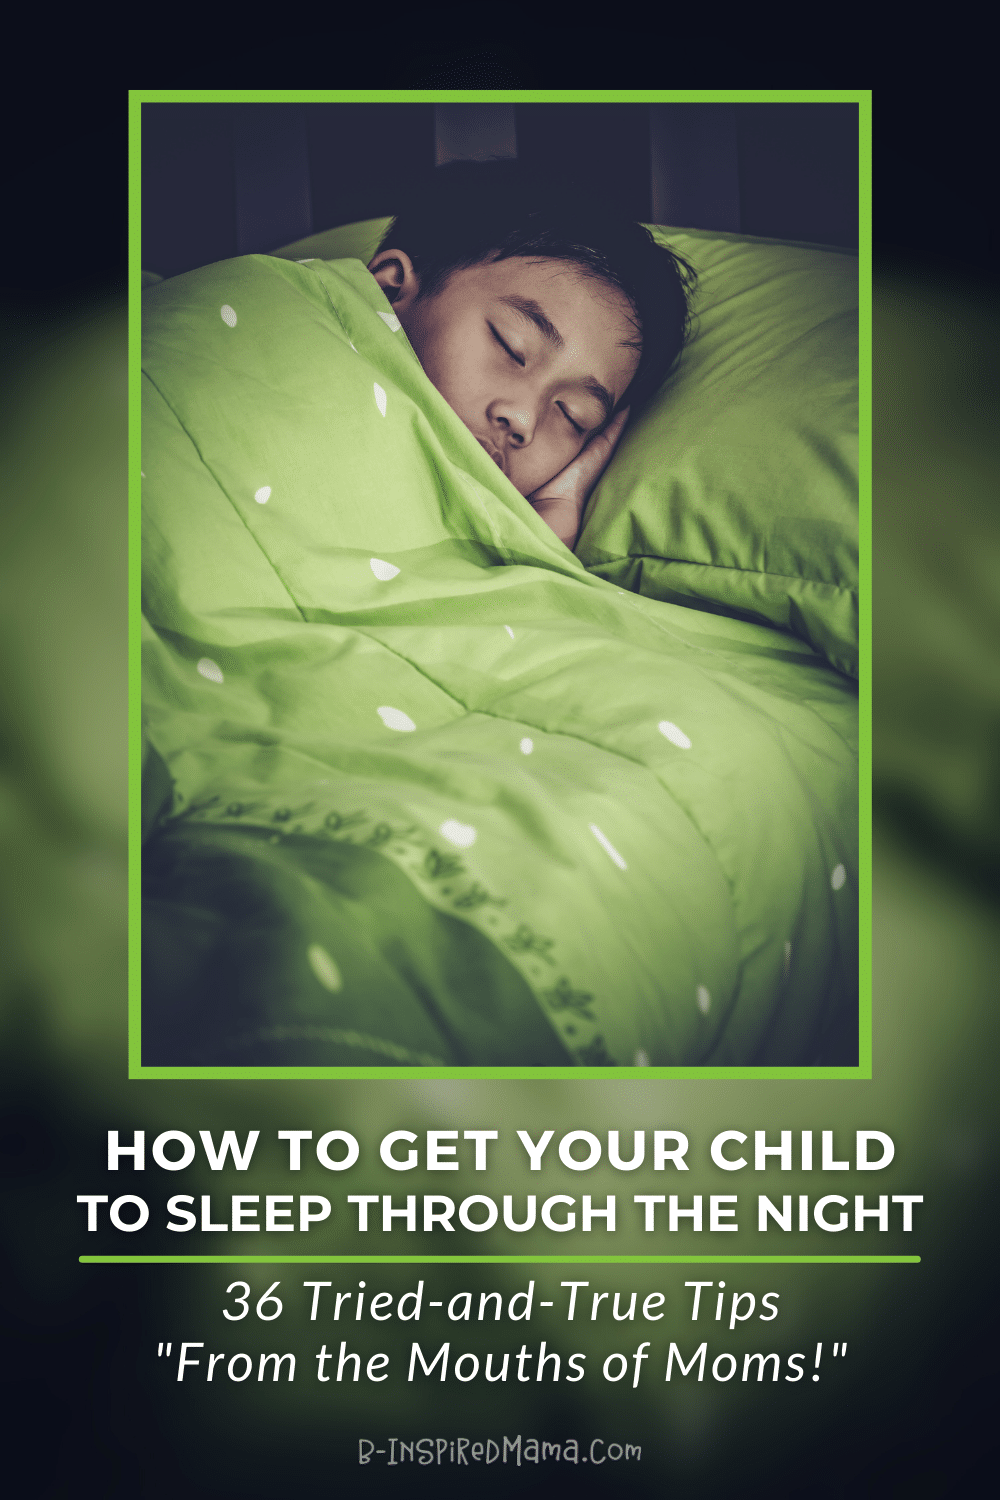 A photo of a boy tucking under a light green comforter sleeping soundly. Title reads "How to Get Your Child to Sleep Through the Night: 36 Tried-and-Tested Tips 'From the Mouths of Moms'".